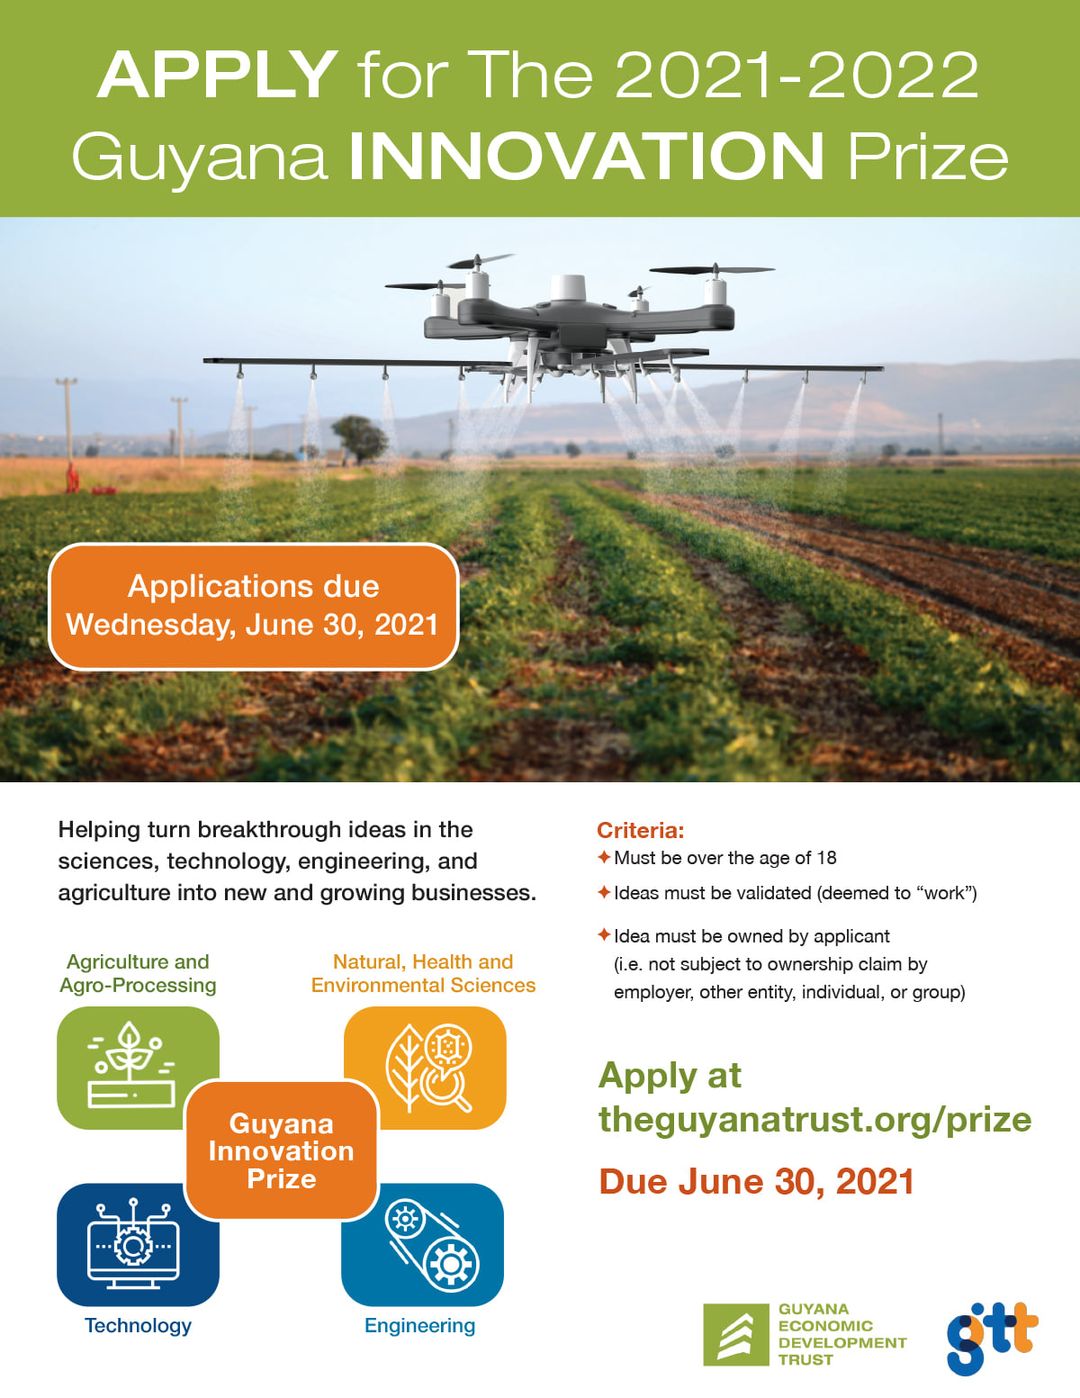 GTT and the Guyana Economic Development Trust (GEDT)announce the 2021 winners of the Guyana Innovation Prize